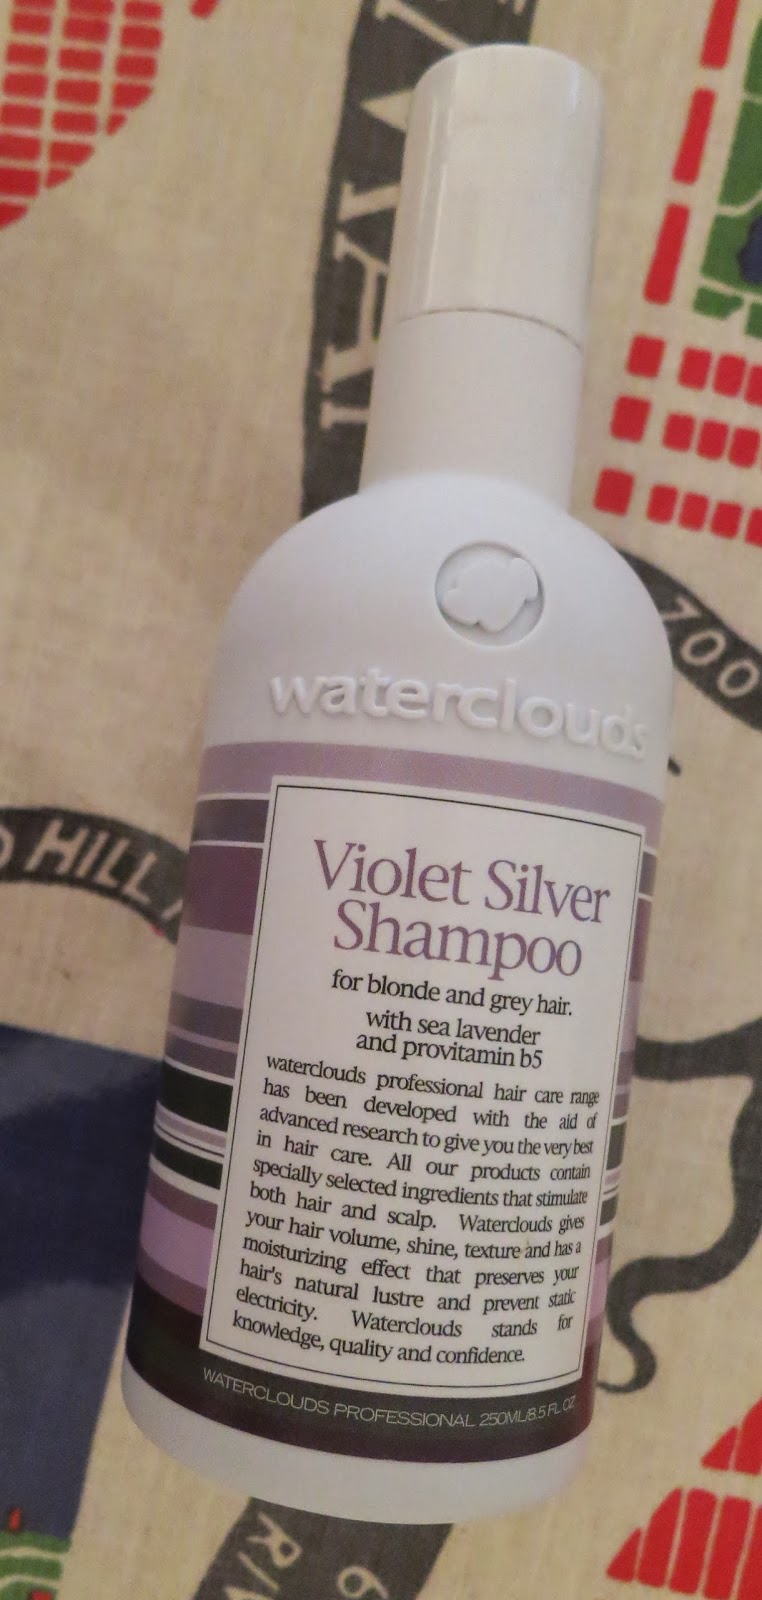 Kammer Print smør Past, Present, Future: Recension: Waterclouds Violet Silver Shampoo